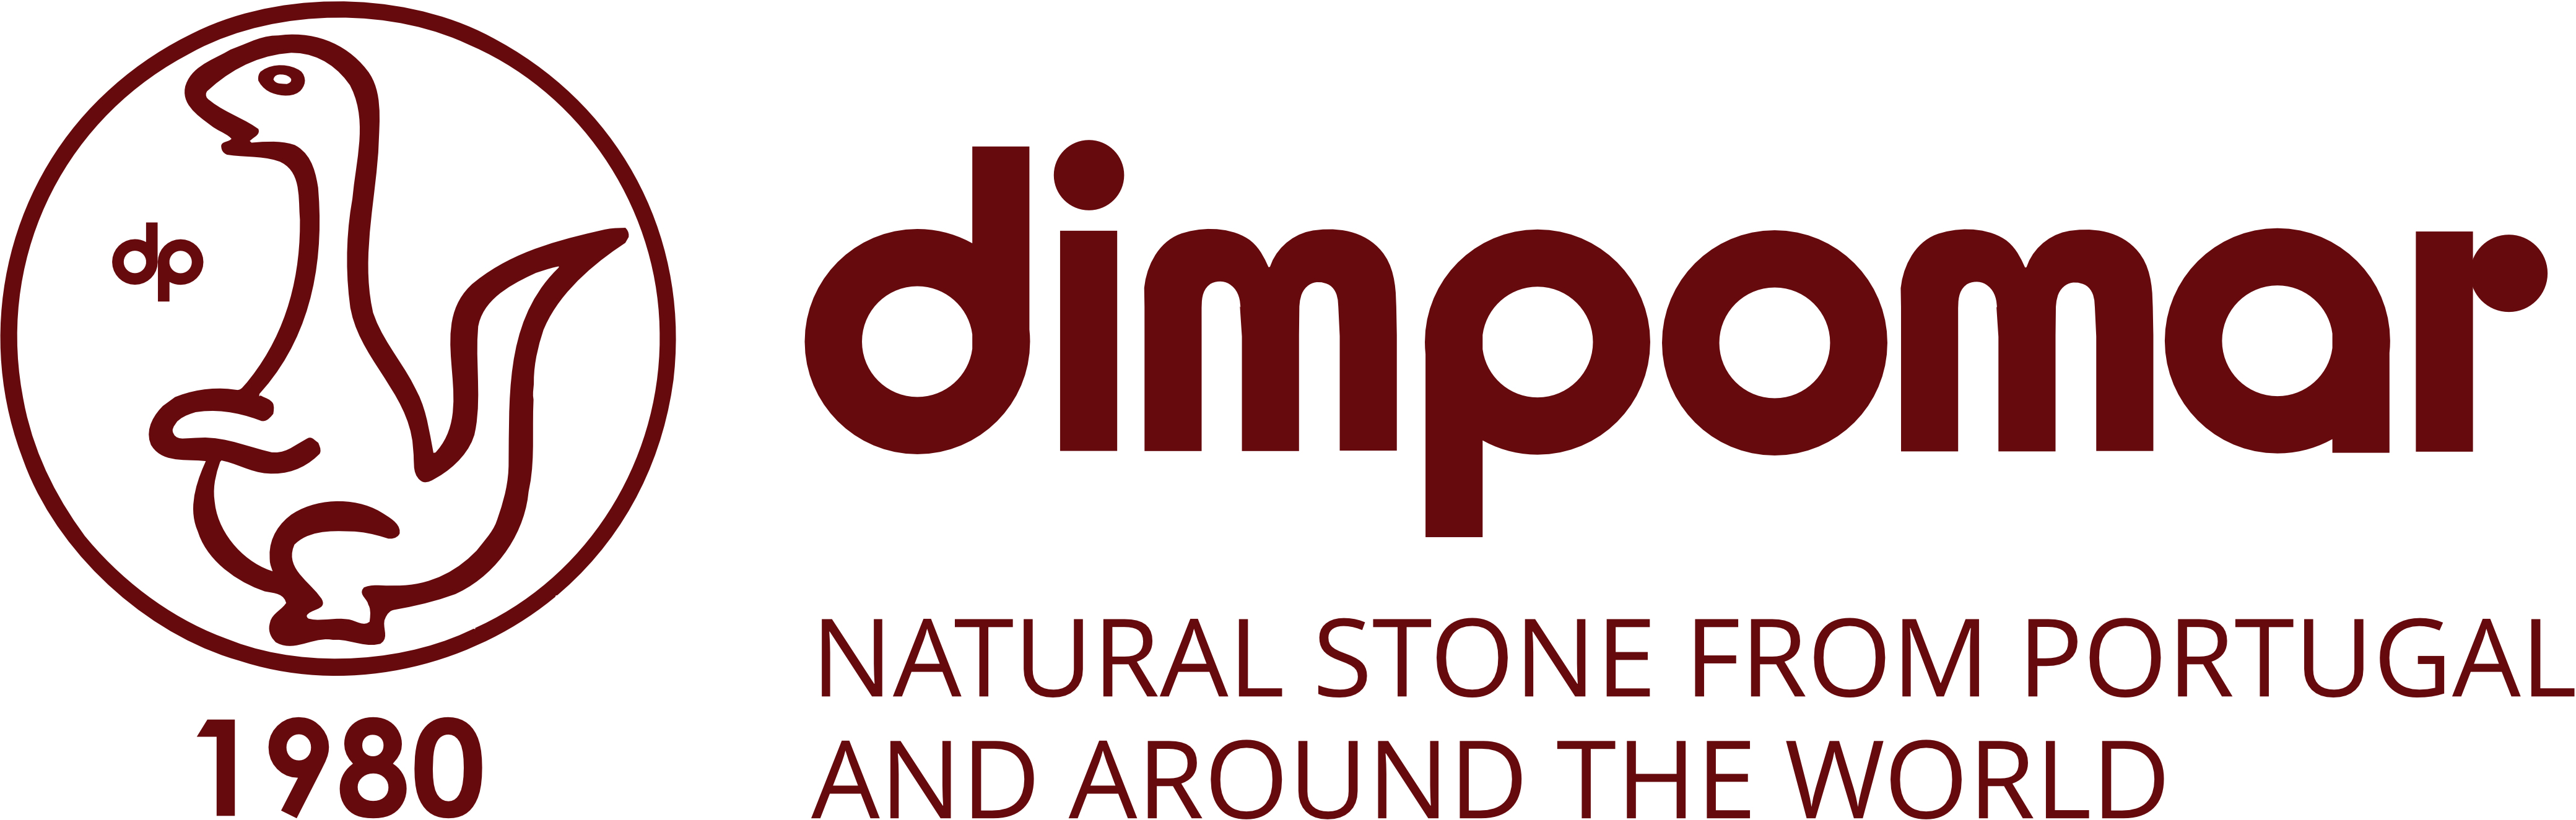 dimpomar - Natural Stone from Portugal and Around the World